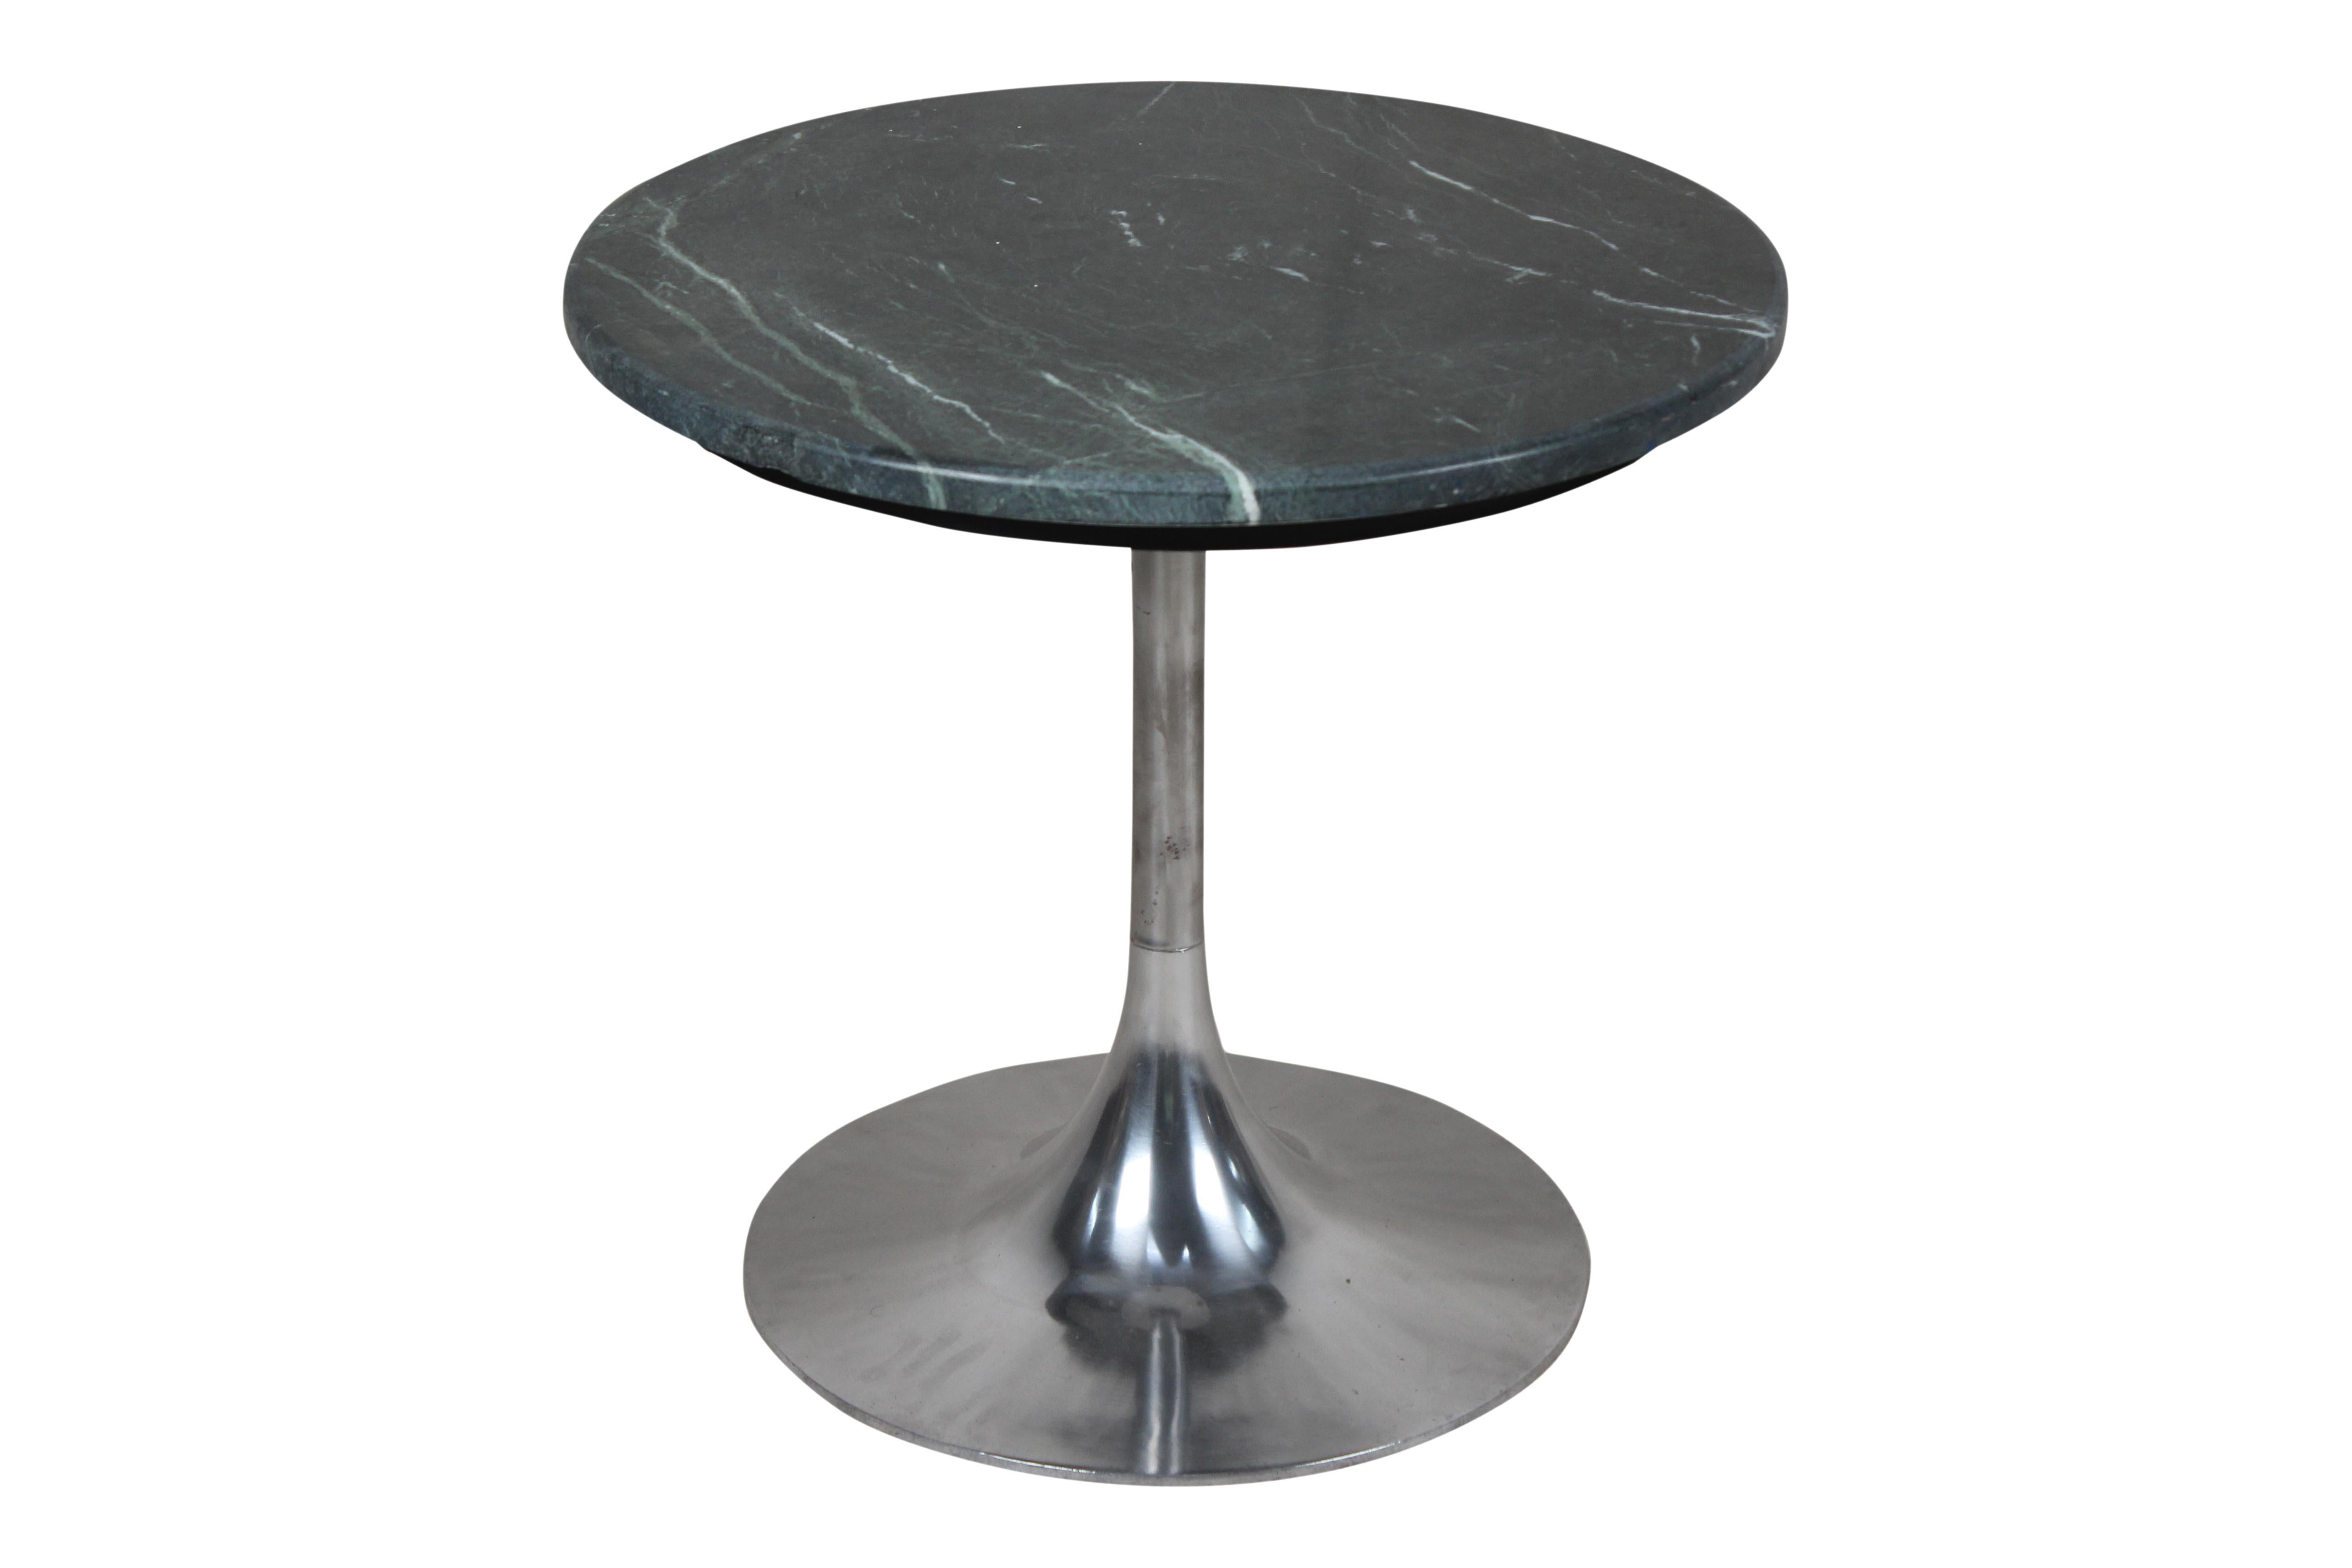 A Mid-Century Modern chrome base with a trumpet or tulip shape design. It has an affixed green marble top which is in excellent condition and has a lovely matrix within the stone. Use as a side or end table or even as a coffee or cocktail table. It